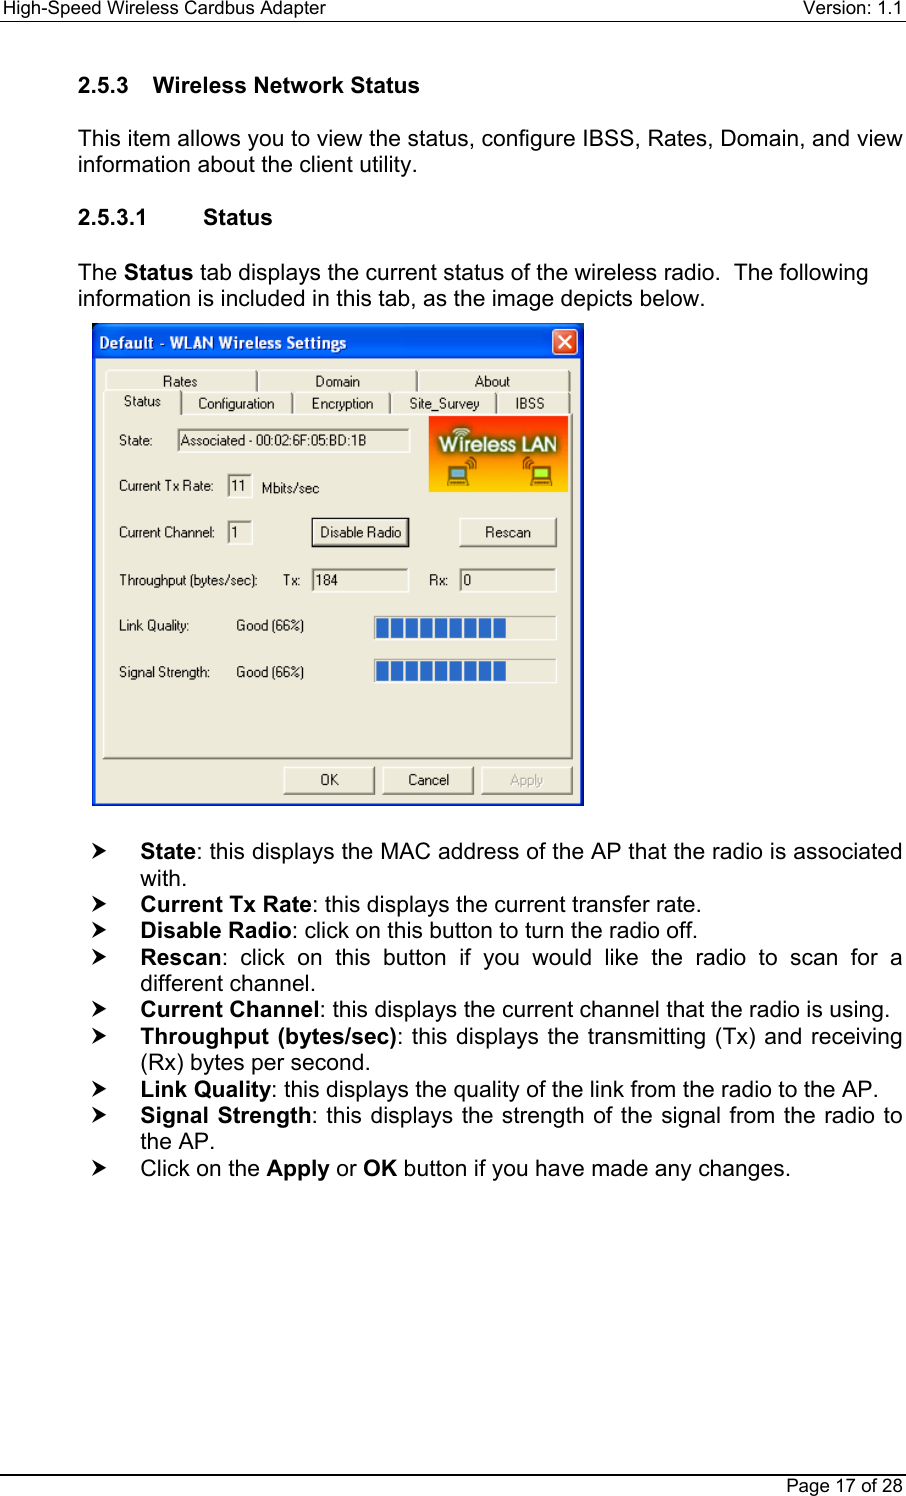 High-Speed Wireless Cardbus Adapter Version: 1.1Page 17 of 282.5.3  Wireless Network StatusThis item allows you to view the status, configure IBSS, Rates, Domain, and viewinformation about the client utility.2.5.3.1    StatusThe Status tab displays the current status of the wireless radio.  The followinginformation is included in this tab, as the image depicts below.h State: this displays the MAC address of the AP that the radio is associatedwith.h Current Tx Rate: this displays the current transfer rate.h Disable Radio: click on this button to turn the radio off.h Rescan: click on this button if you would like the radio to scan for adifferent channel.h Current Channel: this displays the current channel that the radio is using.h Throughput (bytes/sec): this displays the transmitting (Tx) and receiving(Rx) bytes per second.h Link Quality: this displays the quality of the link from the radio to the AP.h Signal Strength: this displays the strength of the signal from the radio tothe AP.h  Click on the Apply or OK button if you have made any changes.